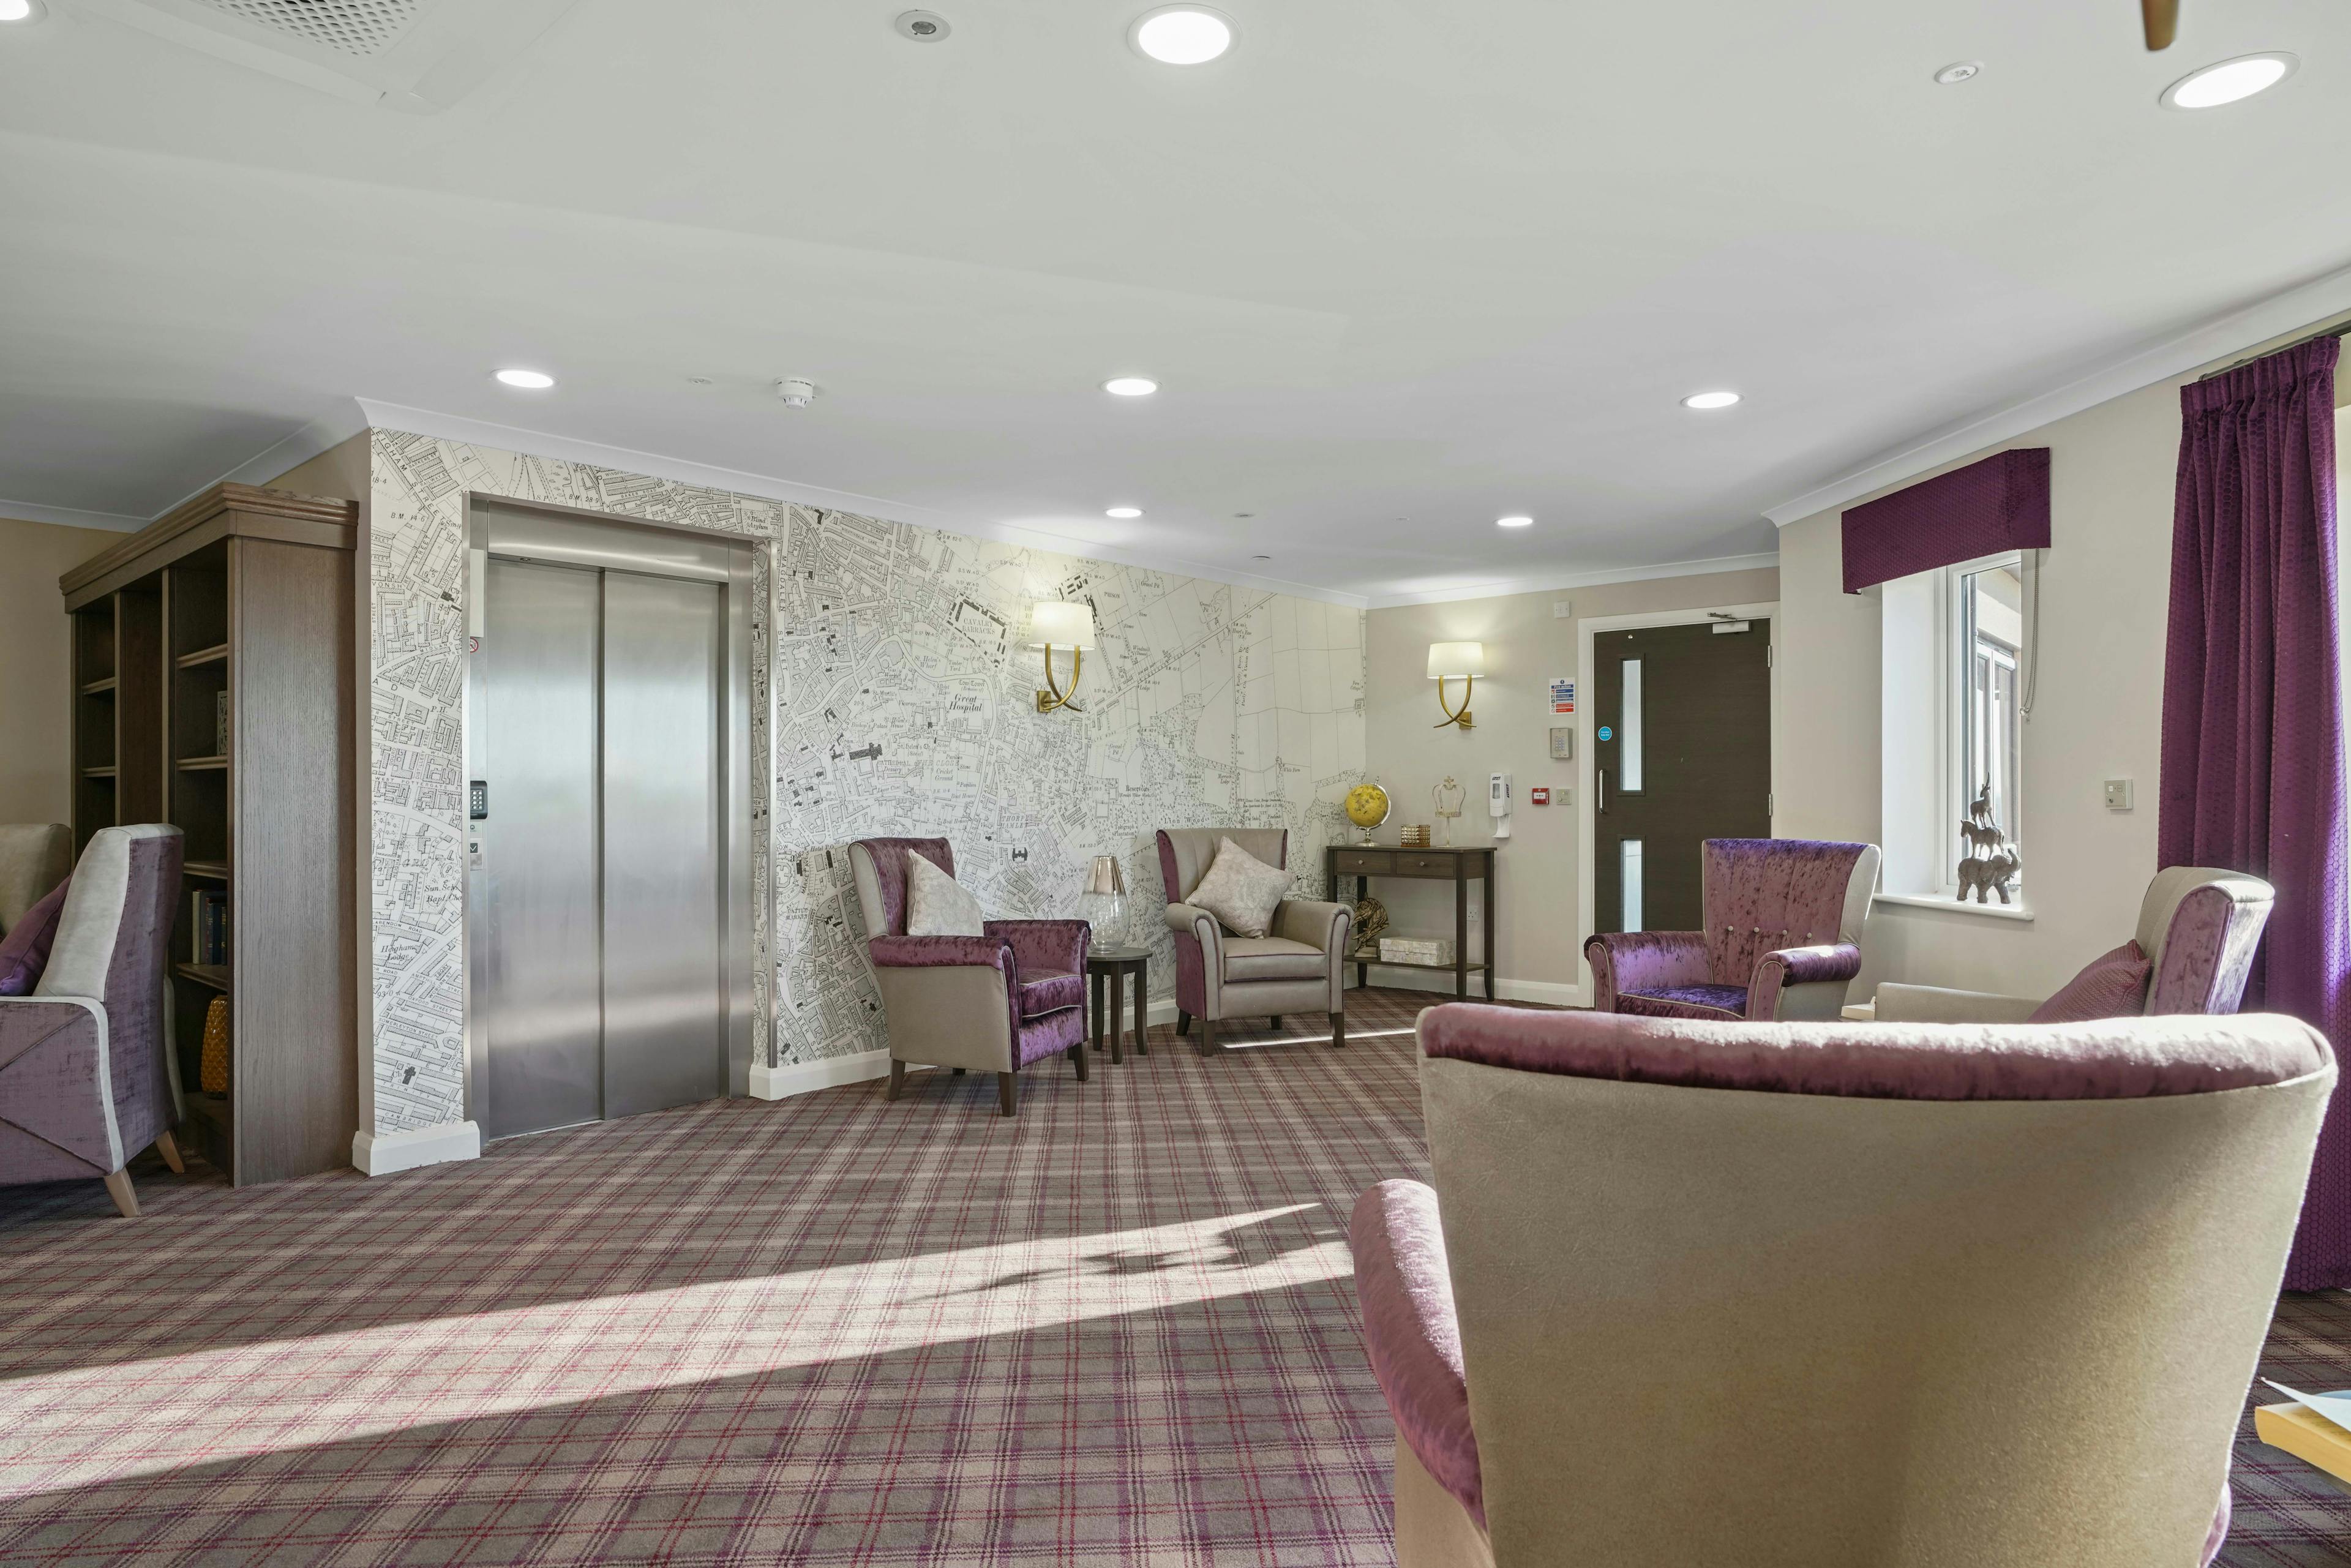 Reception area of Toray Pines care home in Woodhall Spa, Lincolnshire